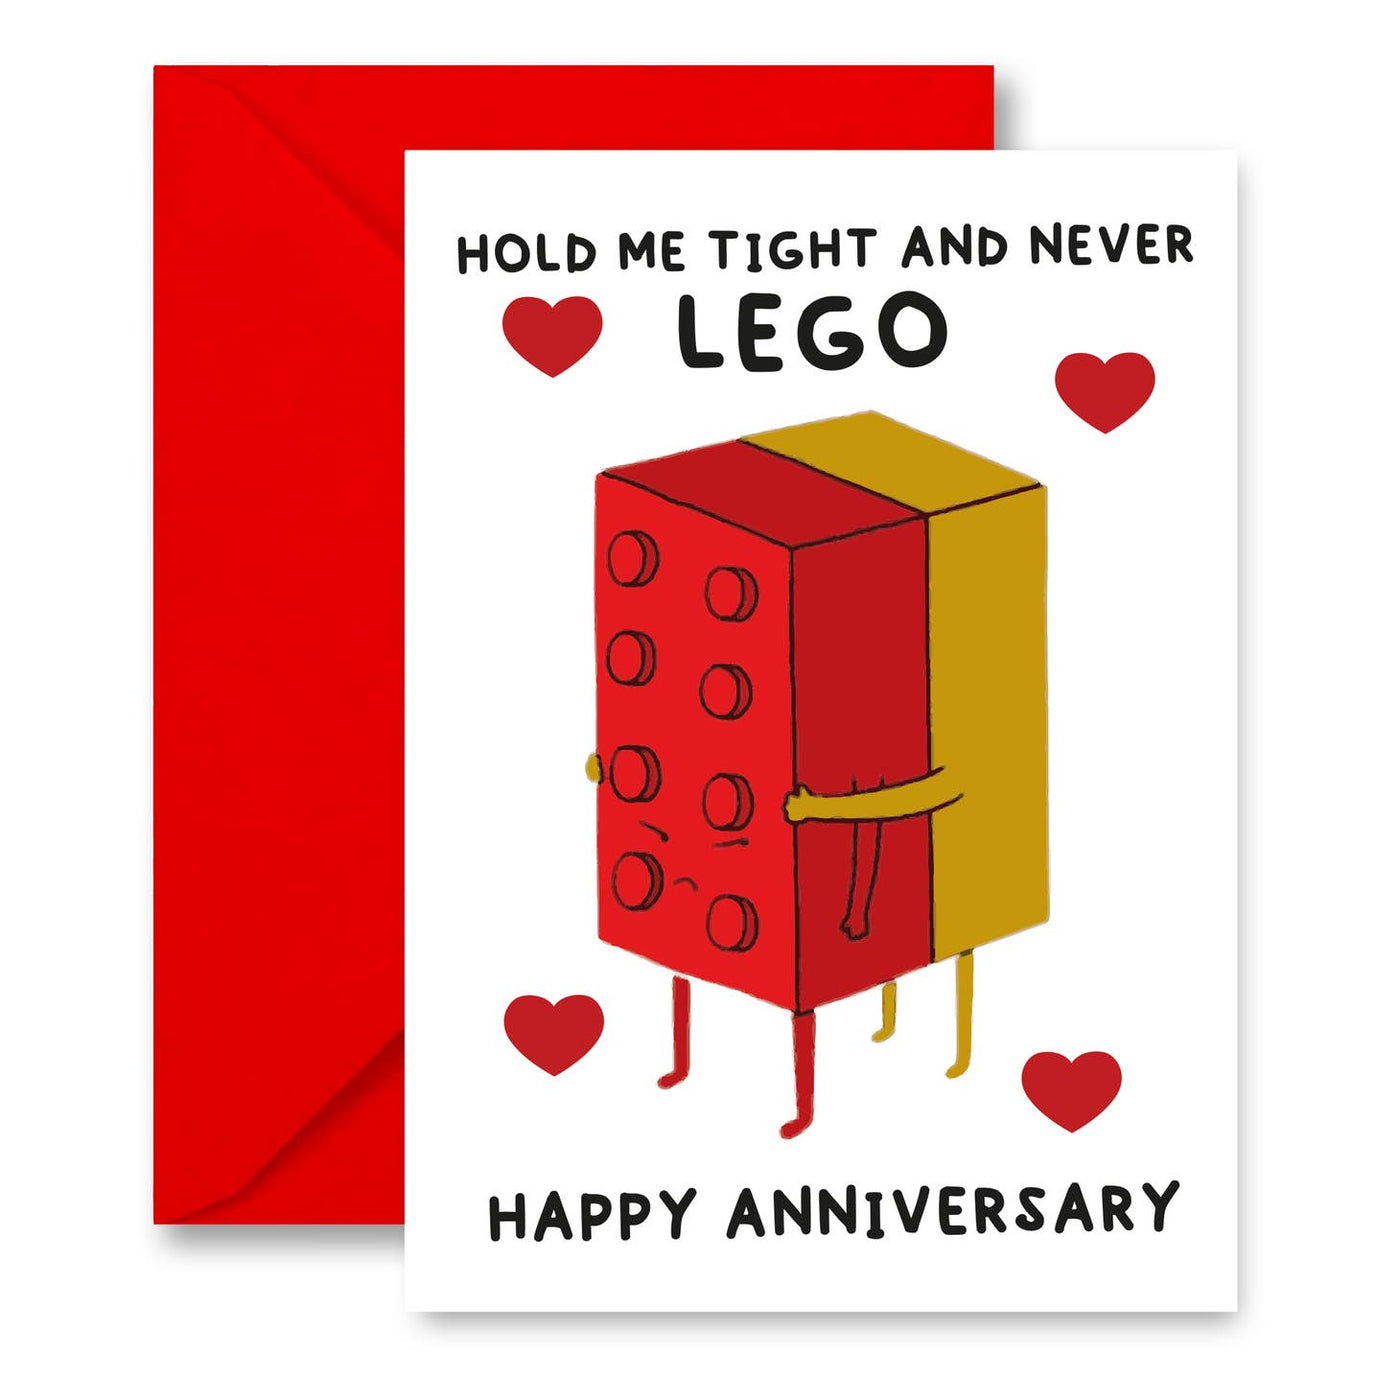 Hold Me Tight And Never Lego Anniversary Greeting Card